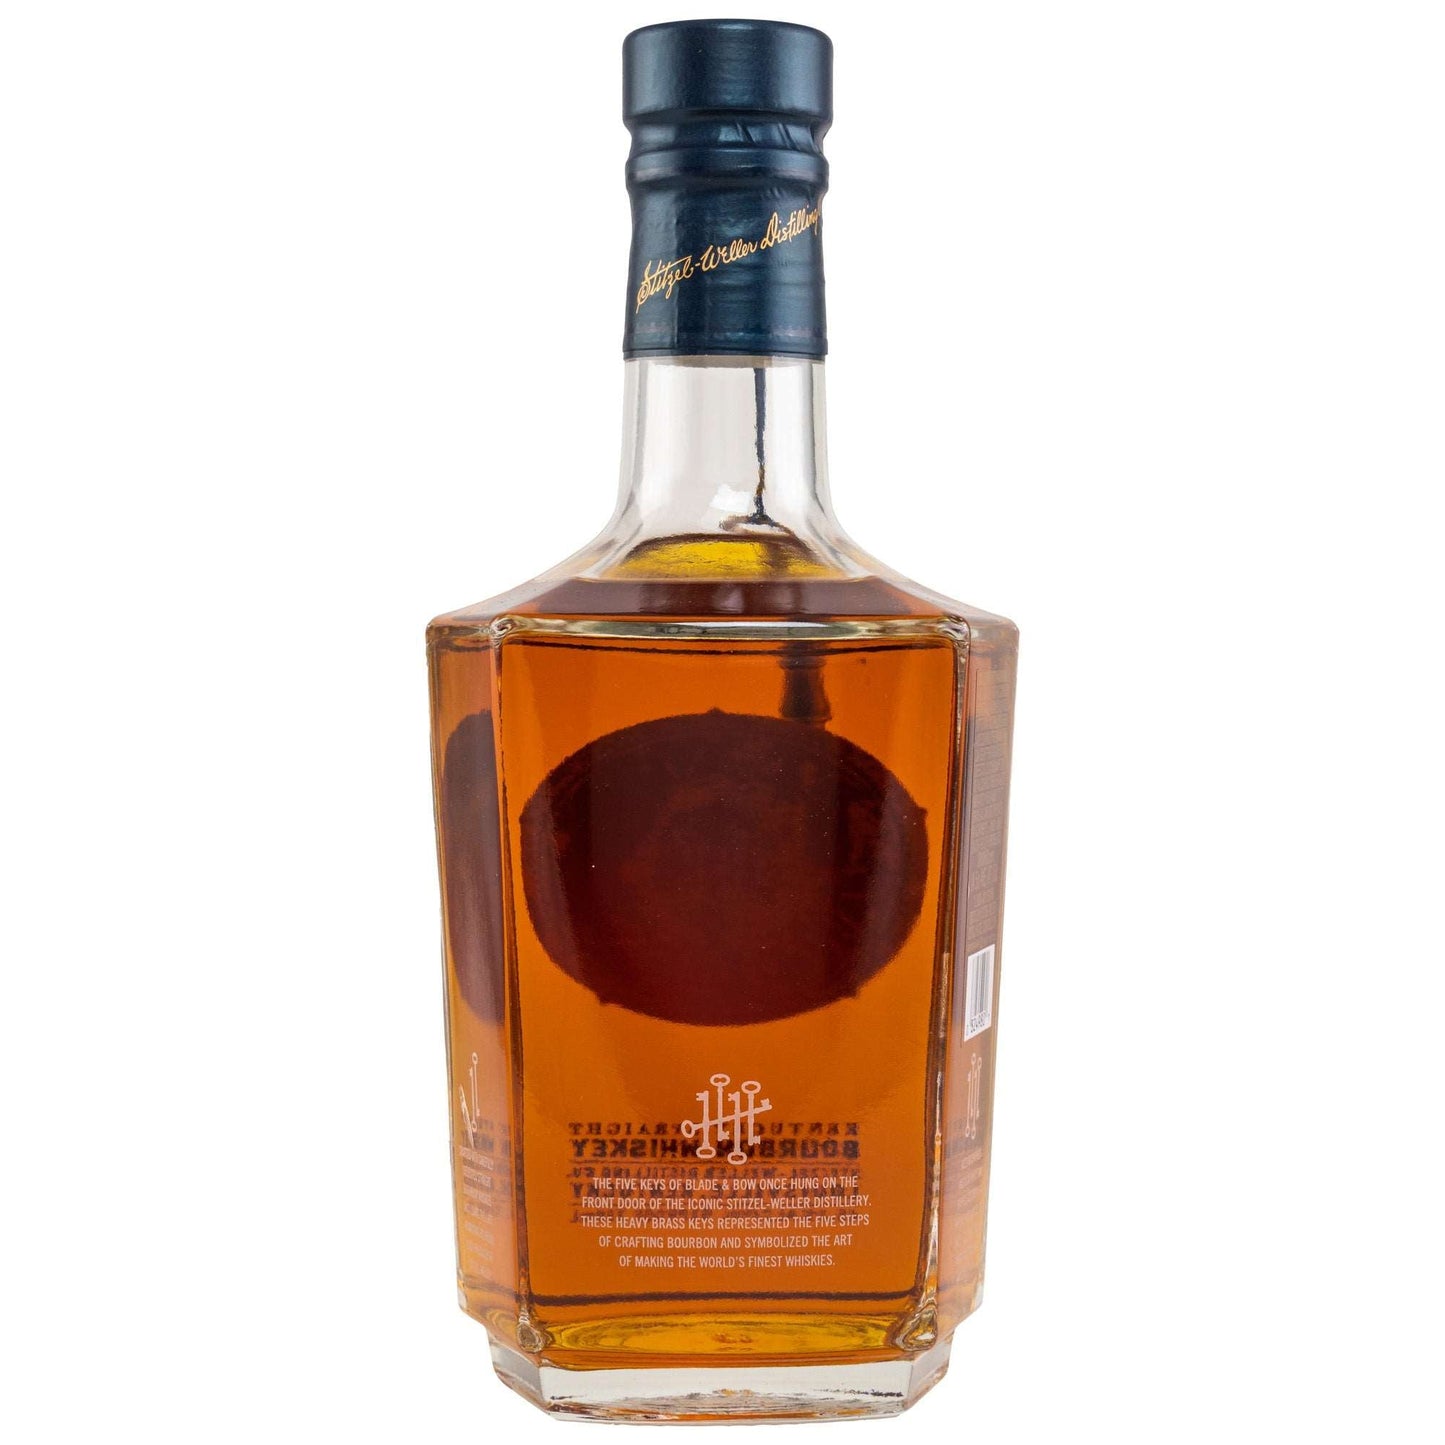 Blade and Bow | Kentucky Straight Bourbon | 0,75l | 45,5%GET A BOTTLE